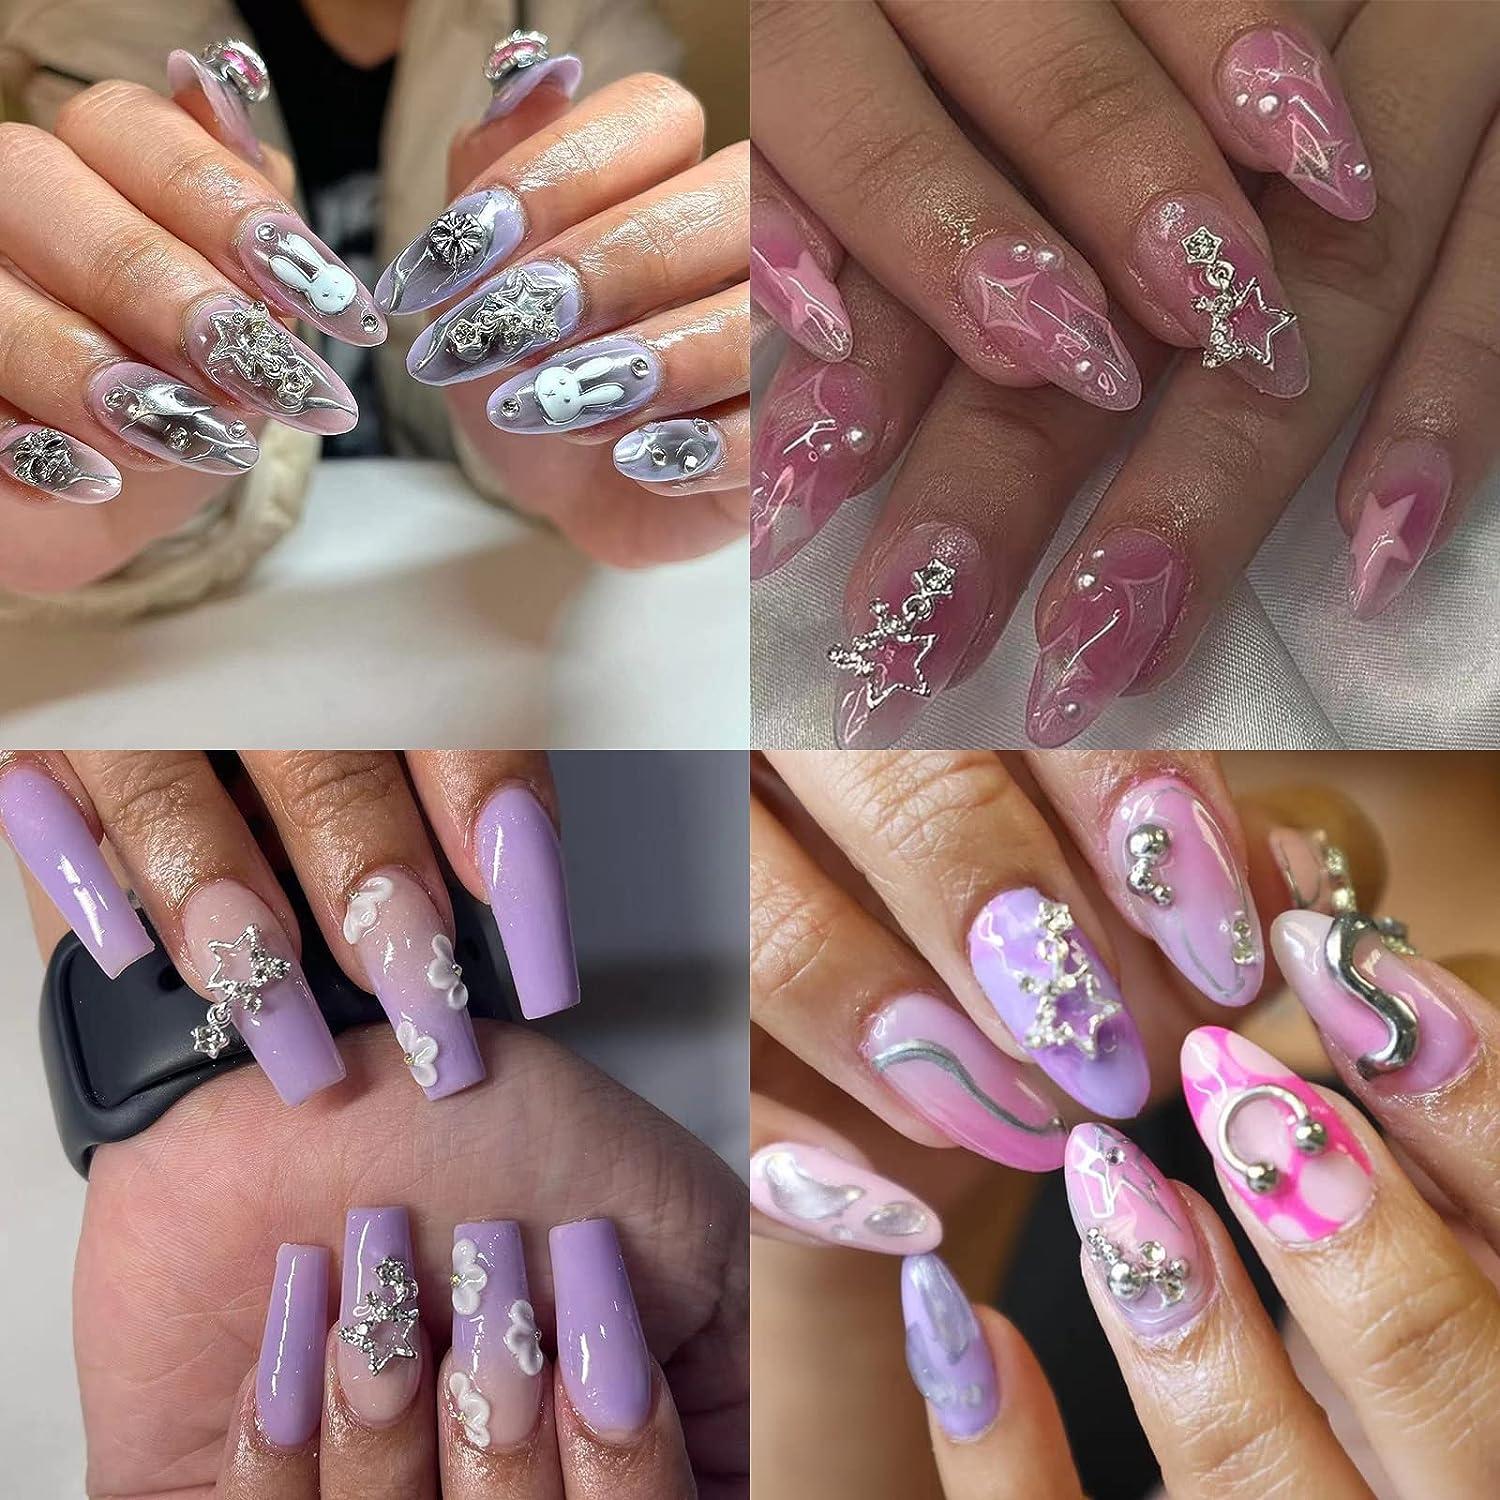 3D Flowers and Pink Gems Press on Nails – Rai's House of Nails